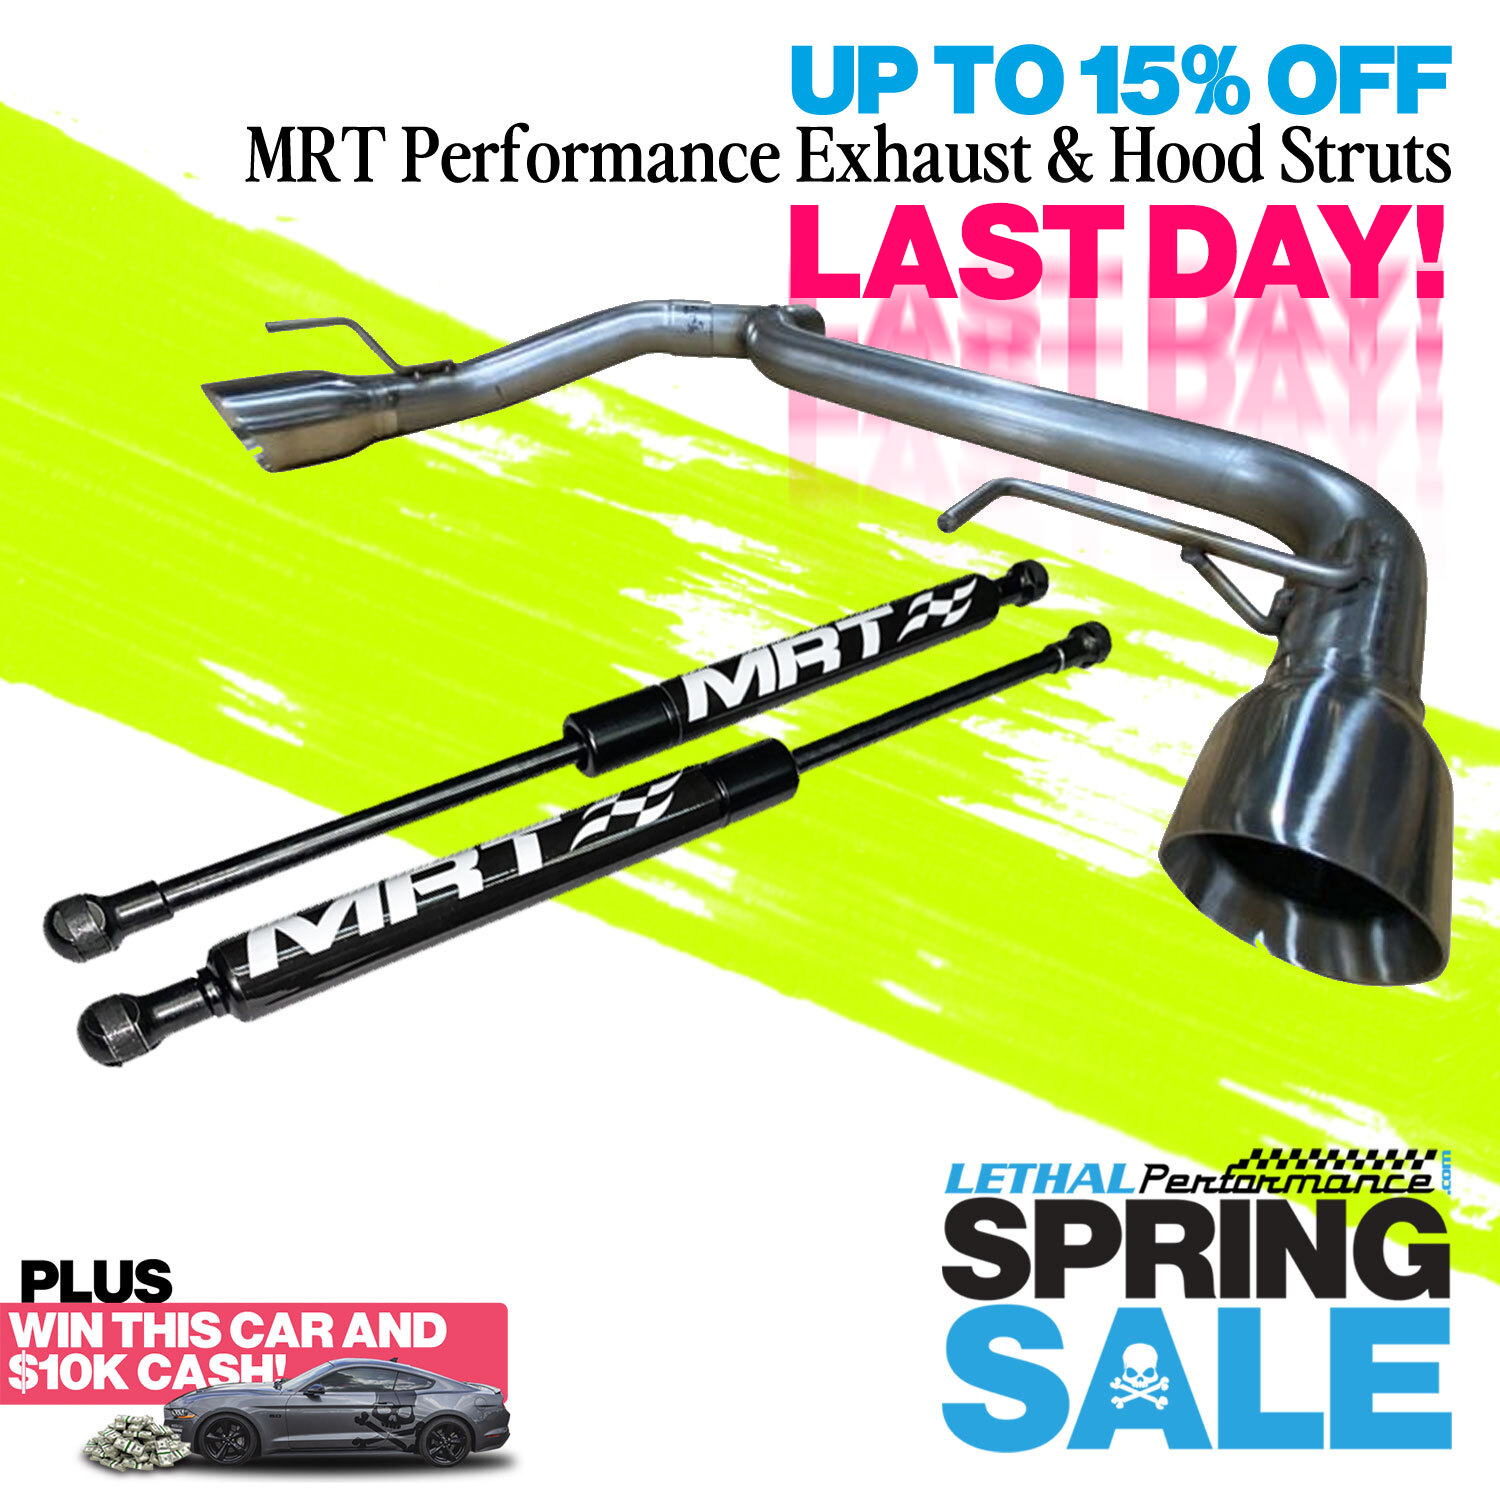 S650 Mustang Spring SALE has SPRUNG here at Lethal Performance!! last day mrt spring sale